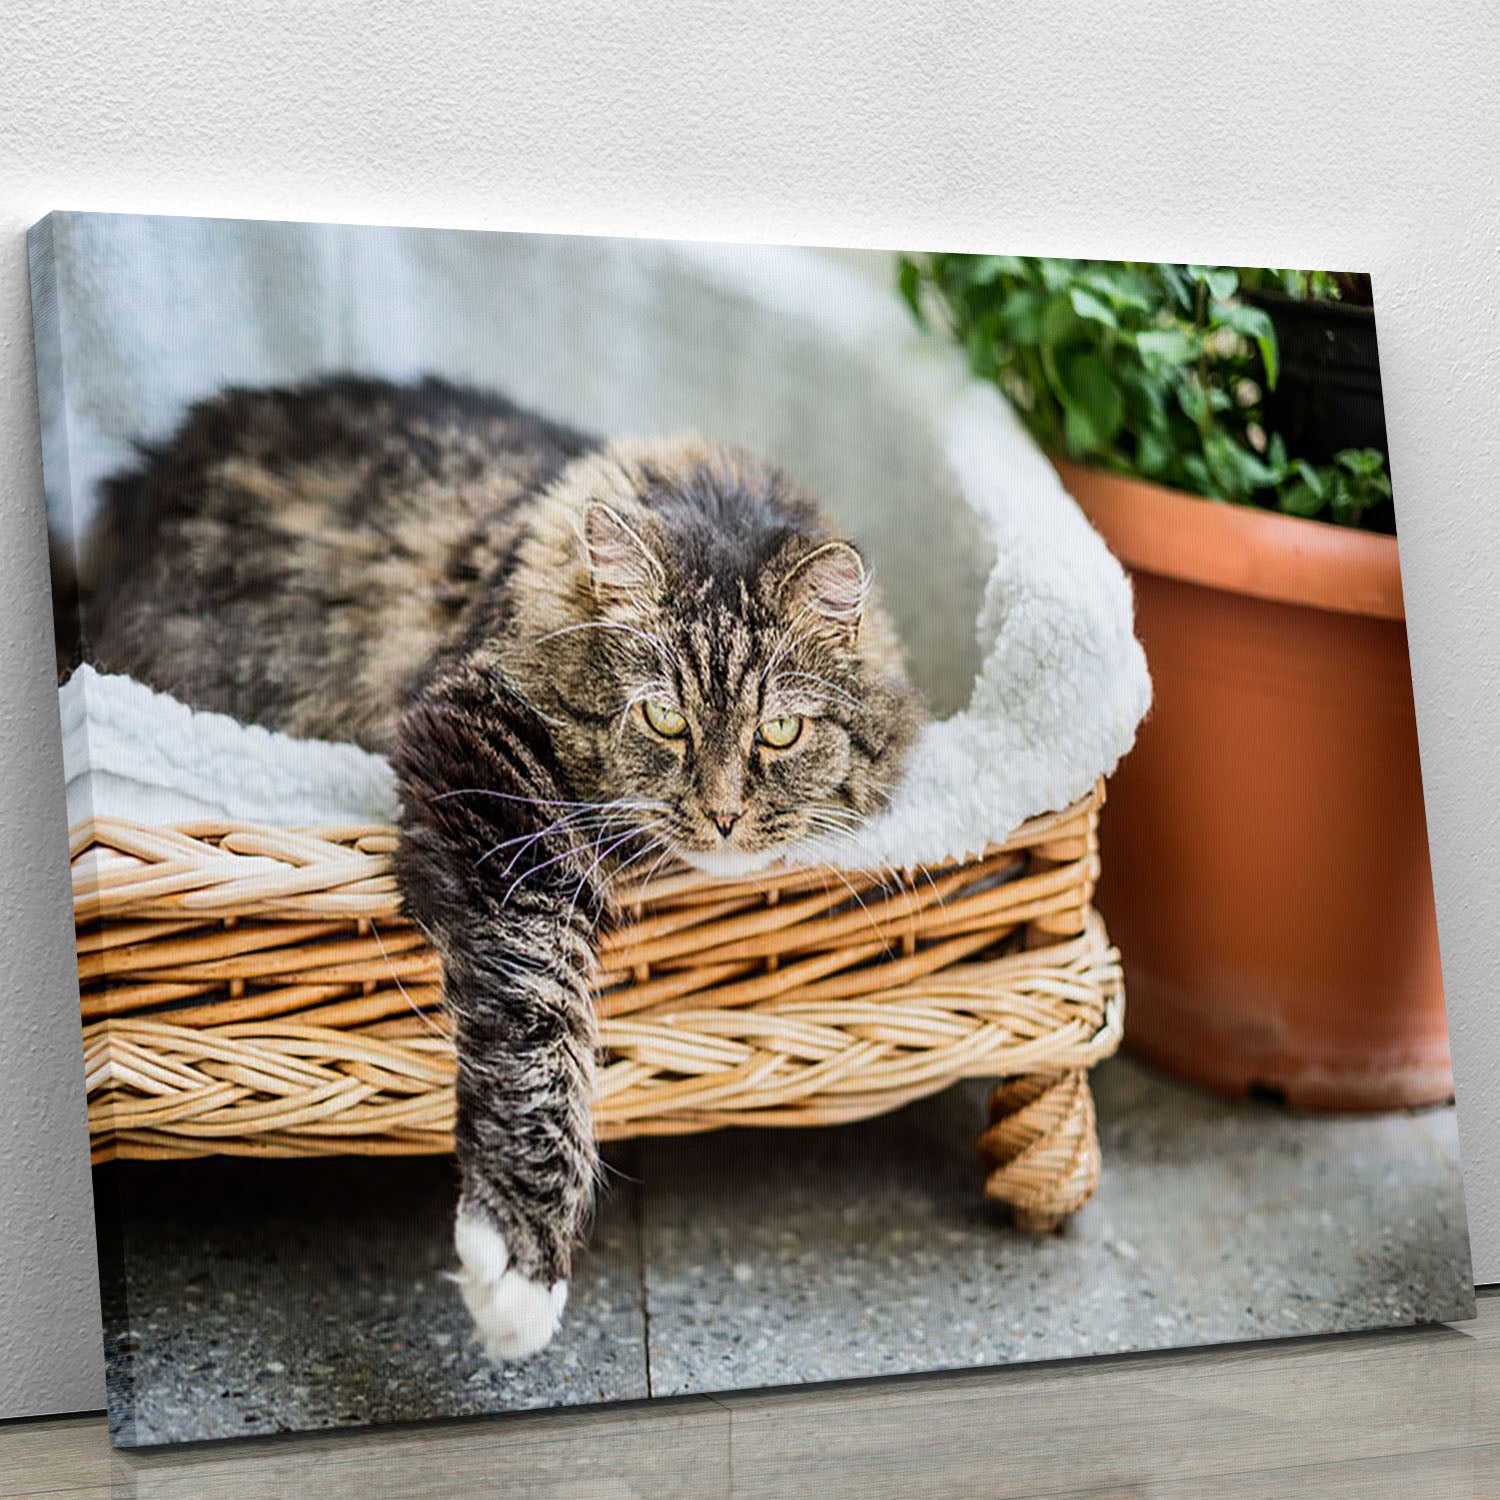 Big fluffy cat lying in wicker chaise sofa couch on balcony or garden terrace with flowers pot Canvas Print or Poster - Canvas Art Rocks - 1